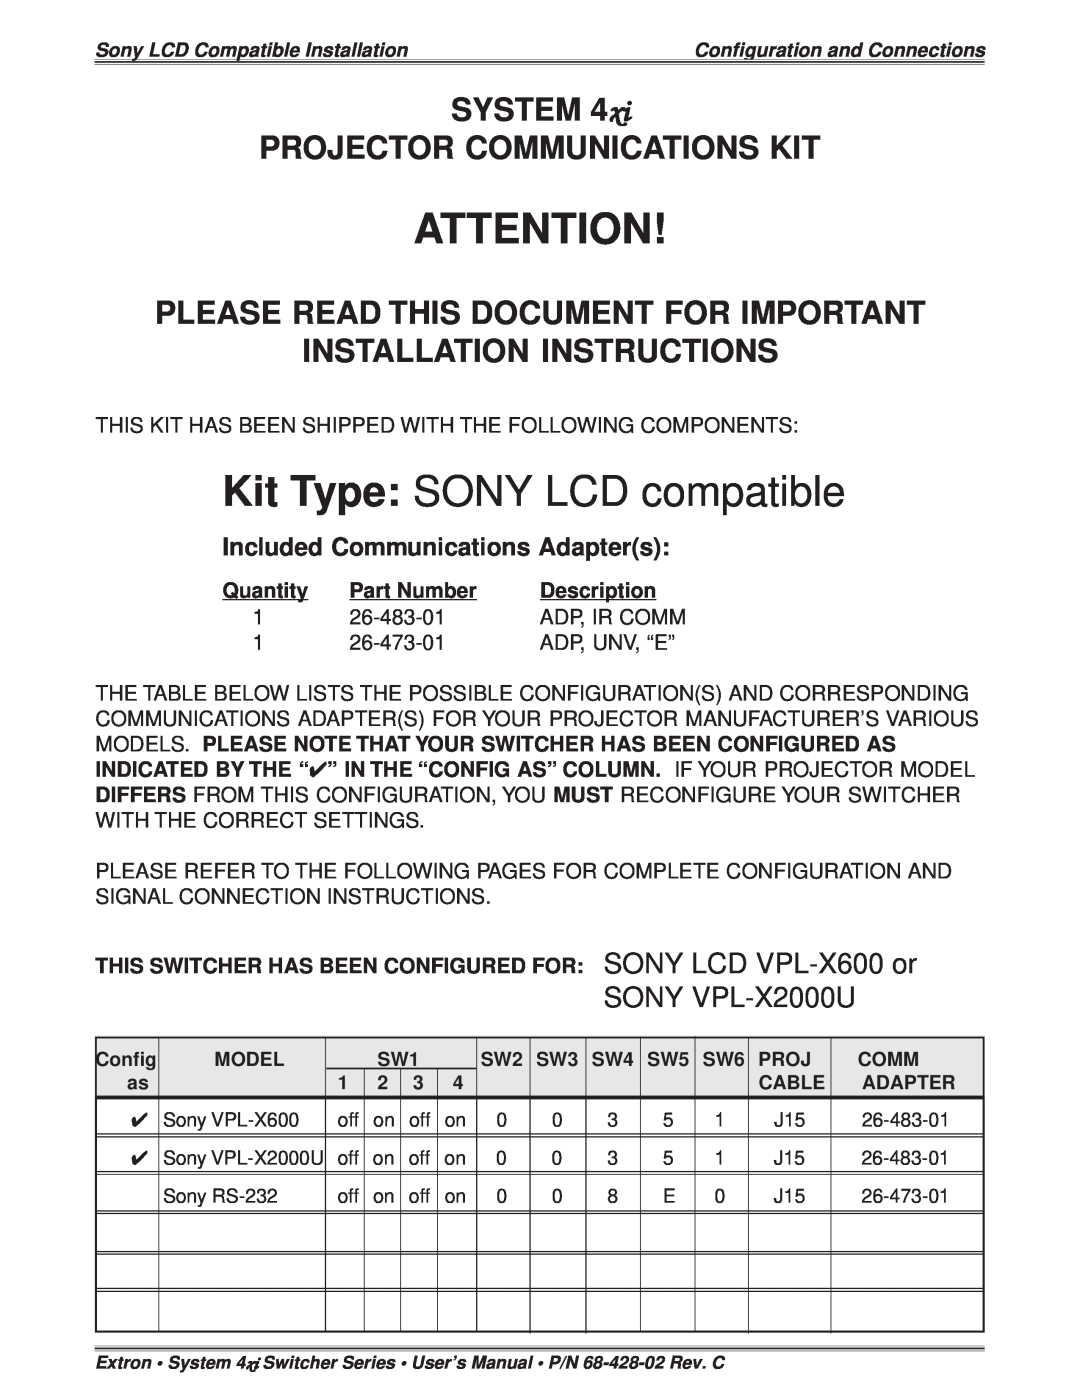 Sony 26-483-01 installation instructions Kit Type SONY LCD compatible, SYSTEM 8/10 Plus PROJECTOR COMMUNICATIONS KIT 